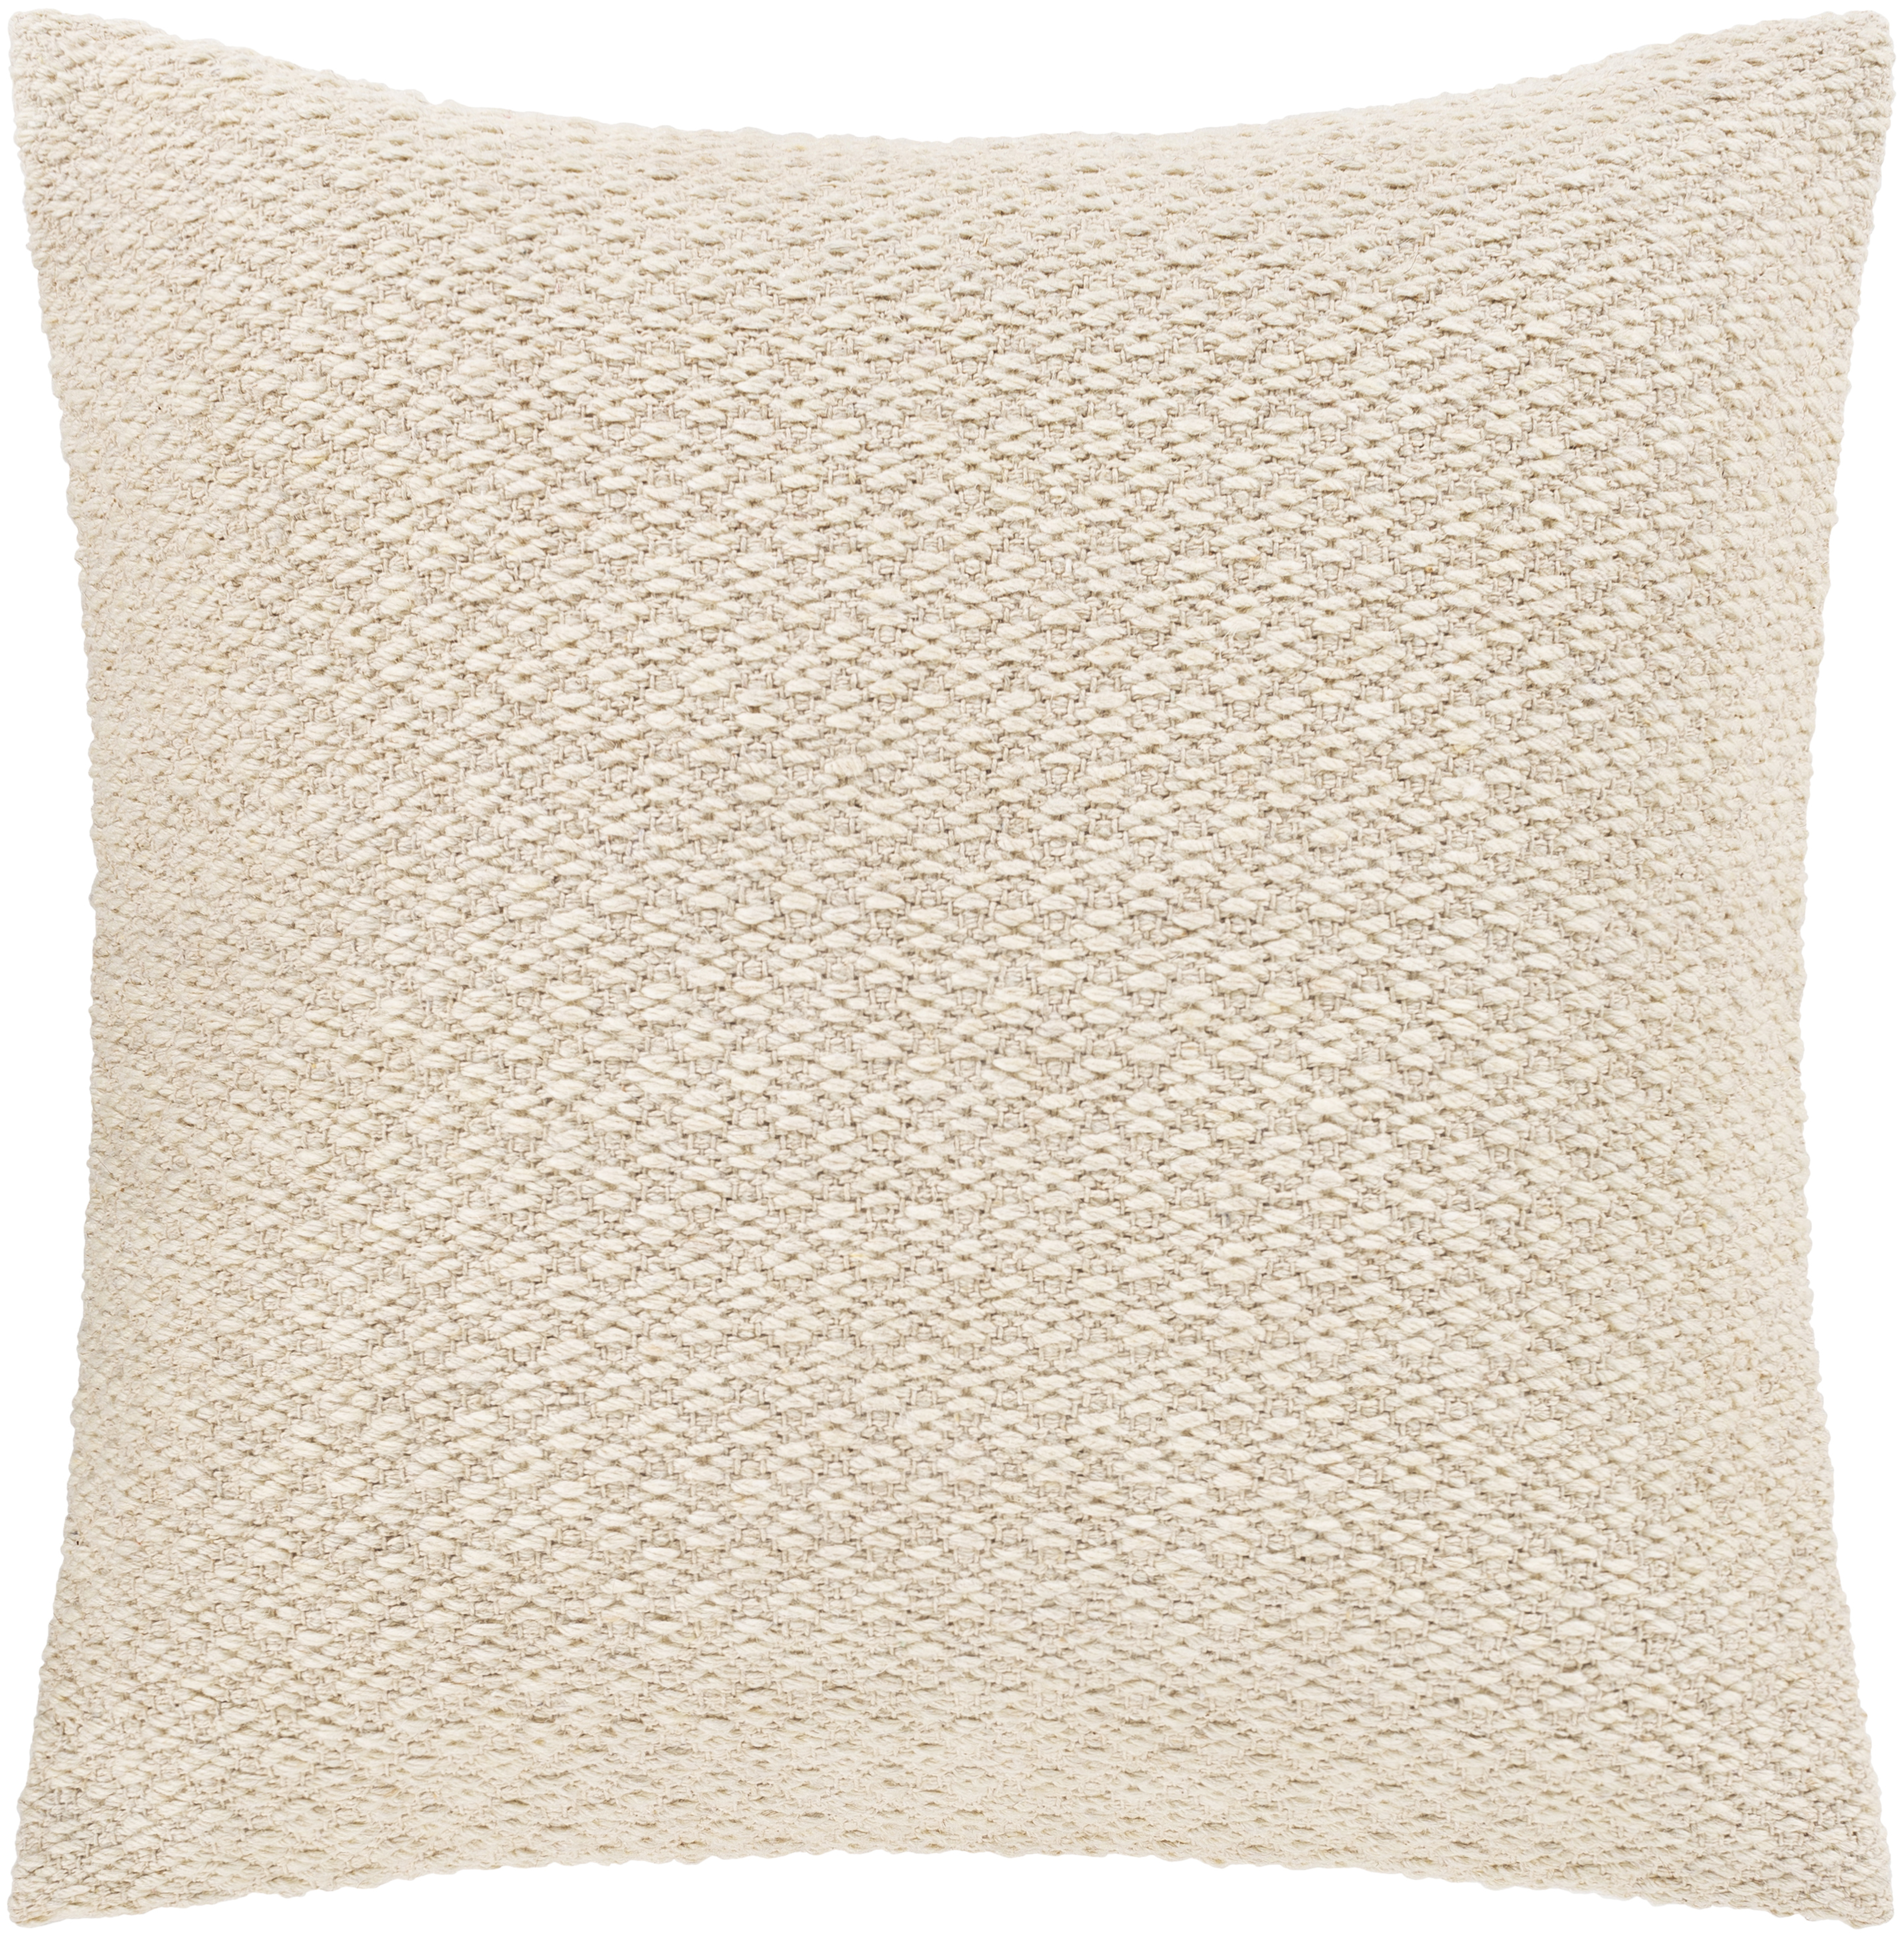 Leif Throw Pillow, 20" x 20", with poly insert - Surya